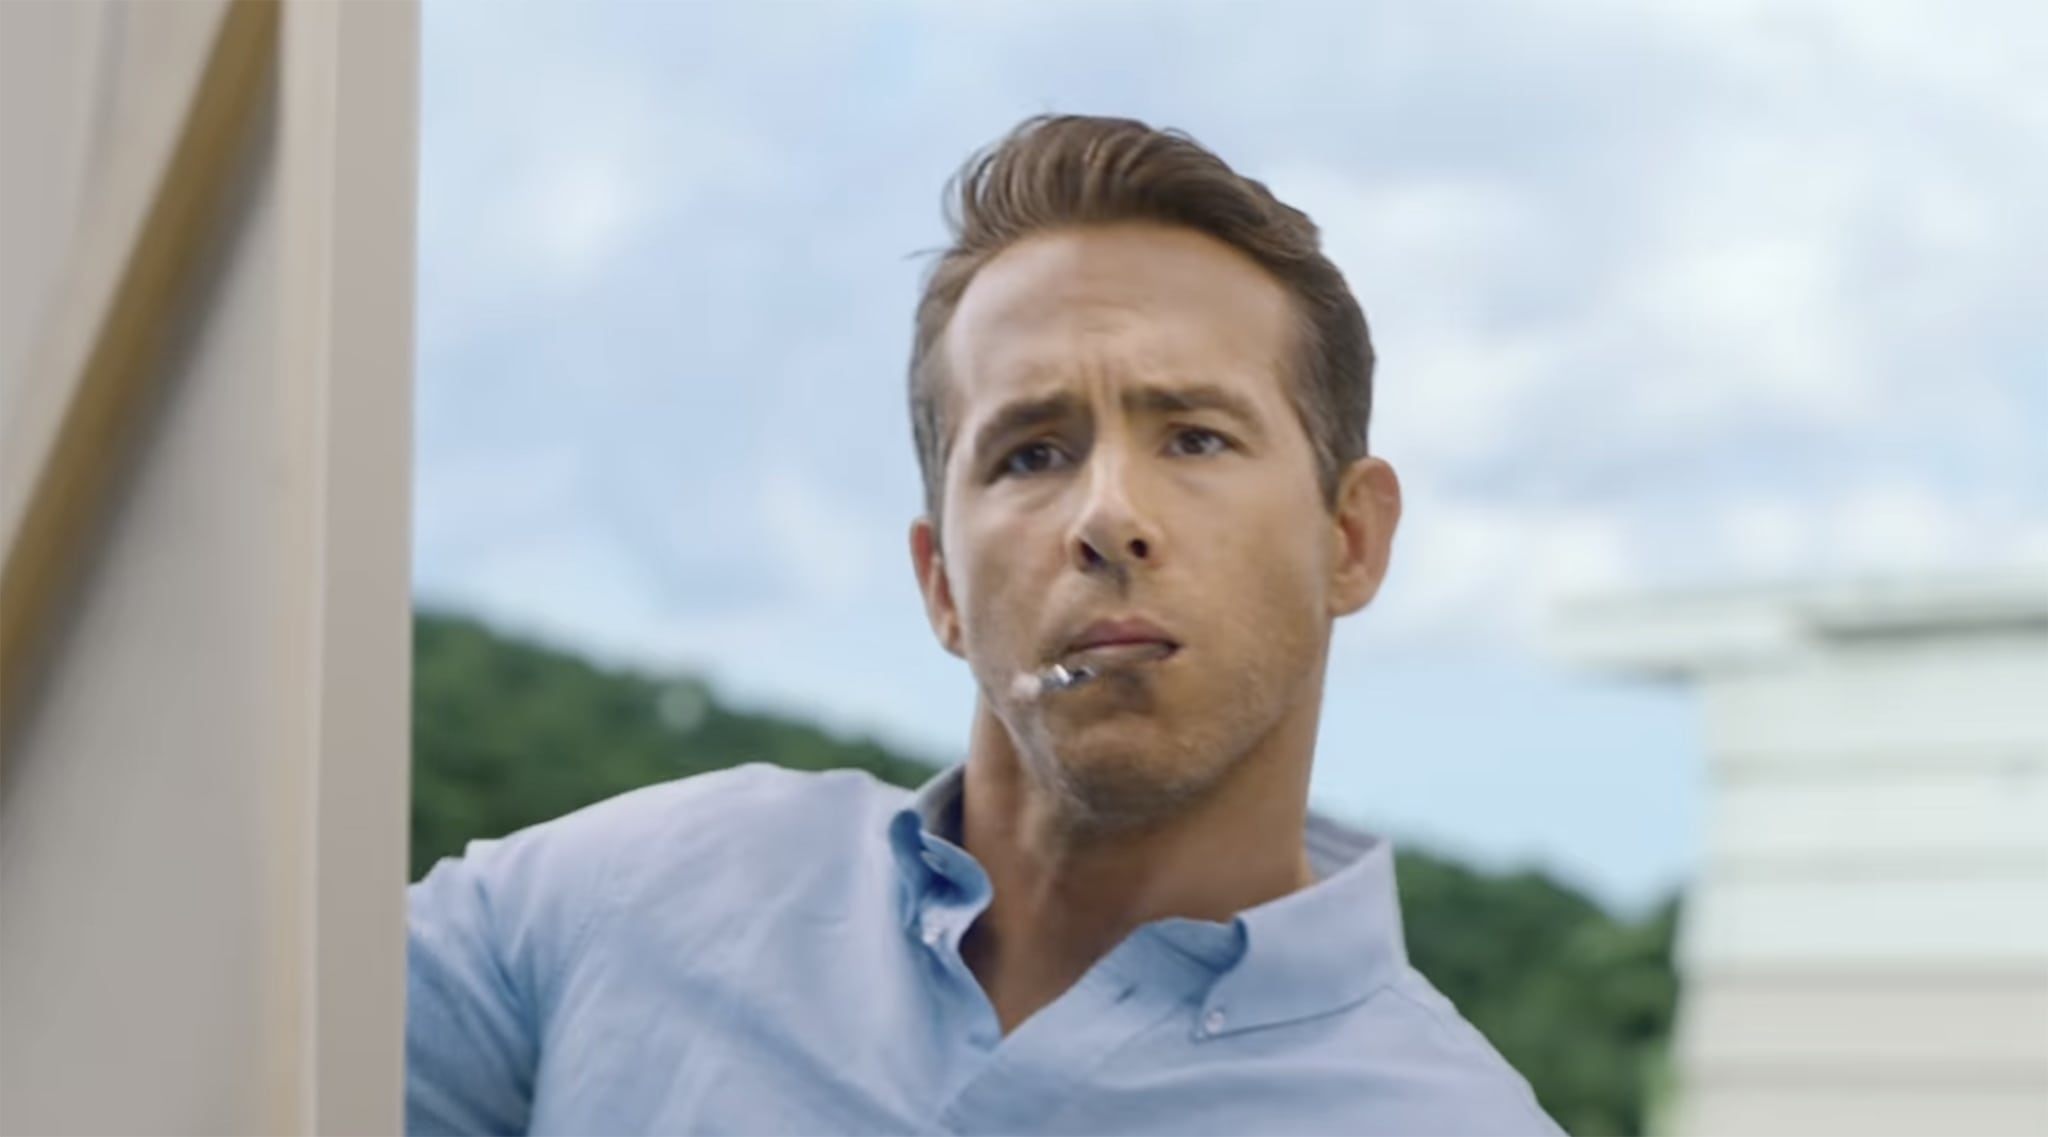 Ryan Reynolds was featured in Taylor Swift's You Need to Calm Down music video